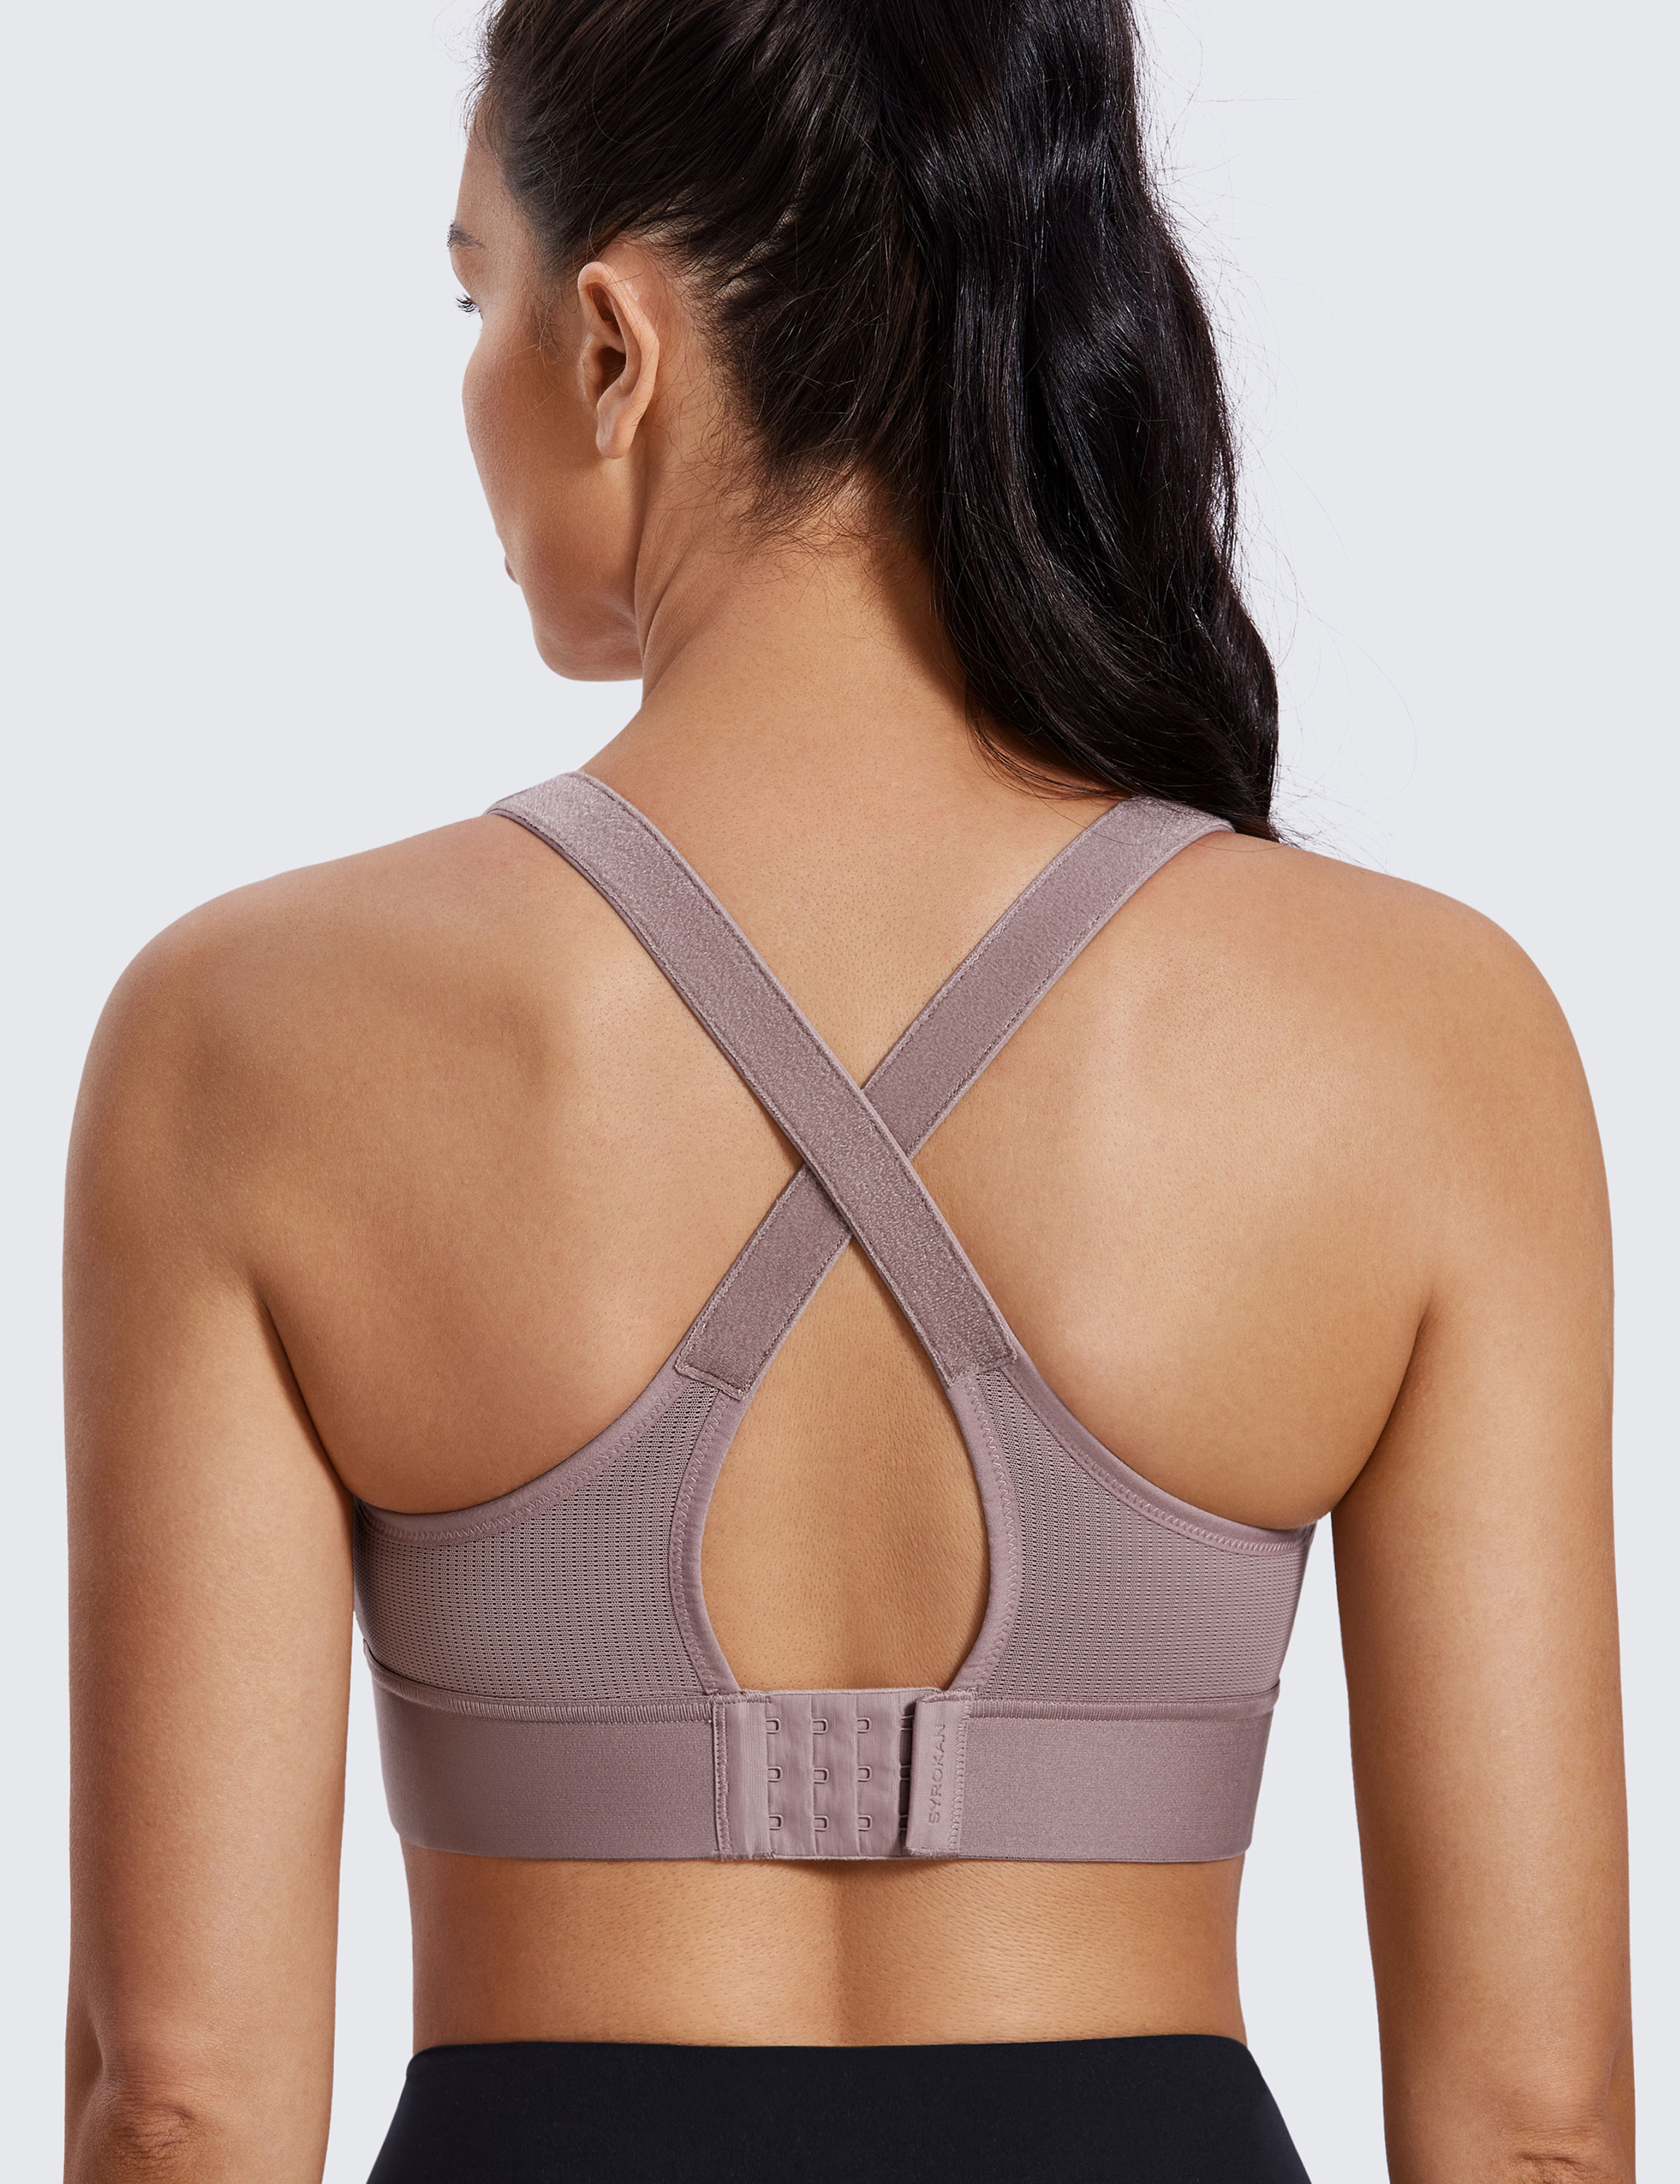 Buy SYROKAN Front Adjustable Sports Bras for Women High Impact